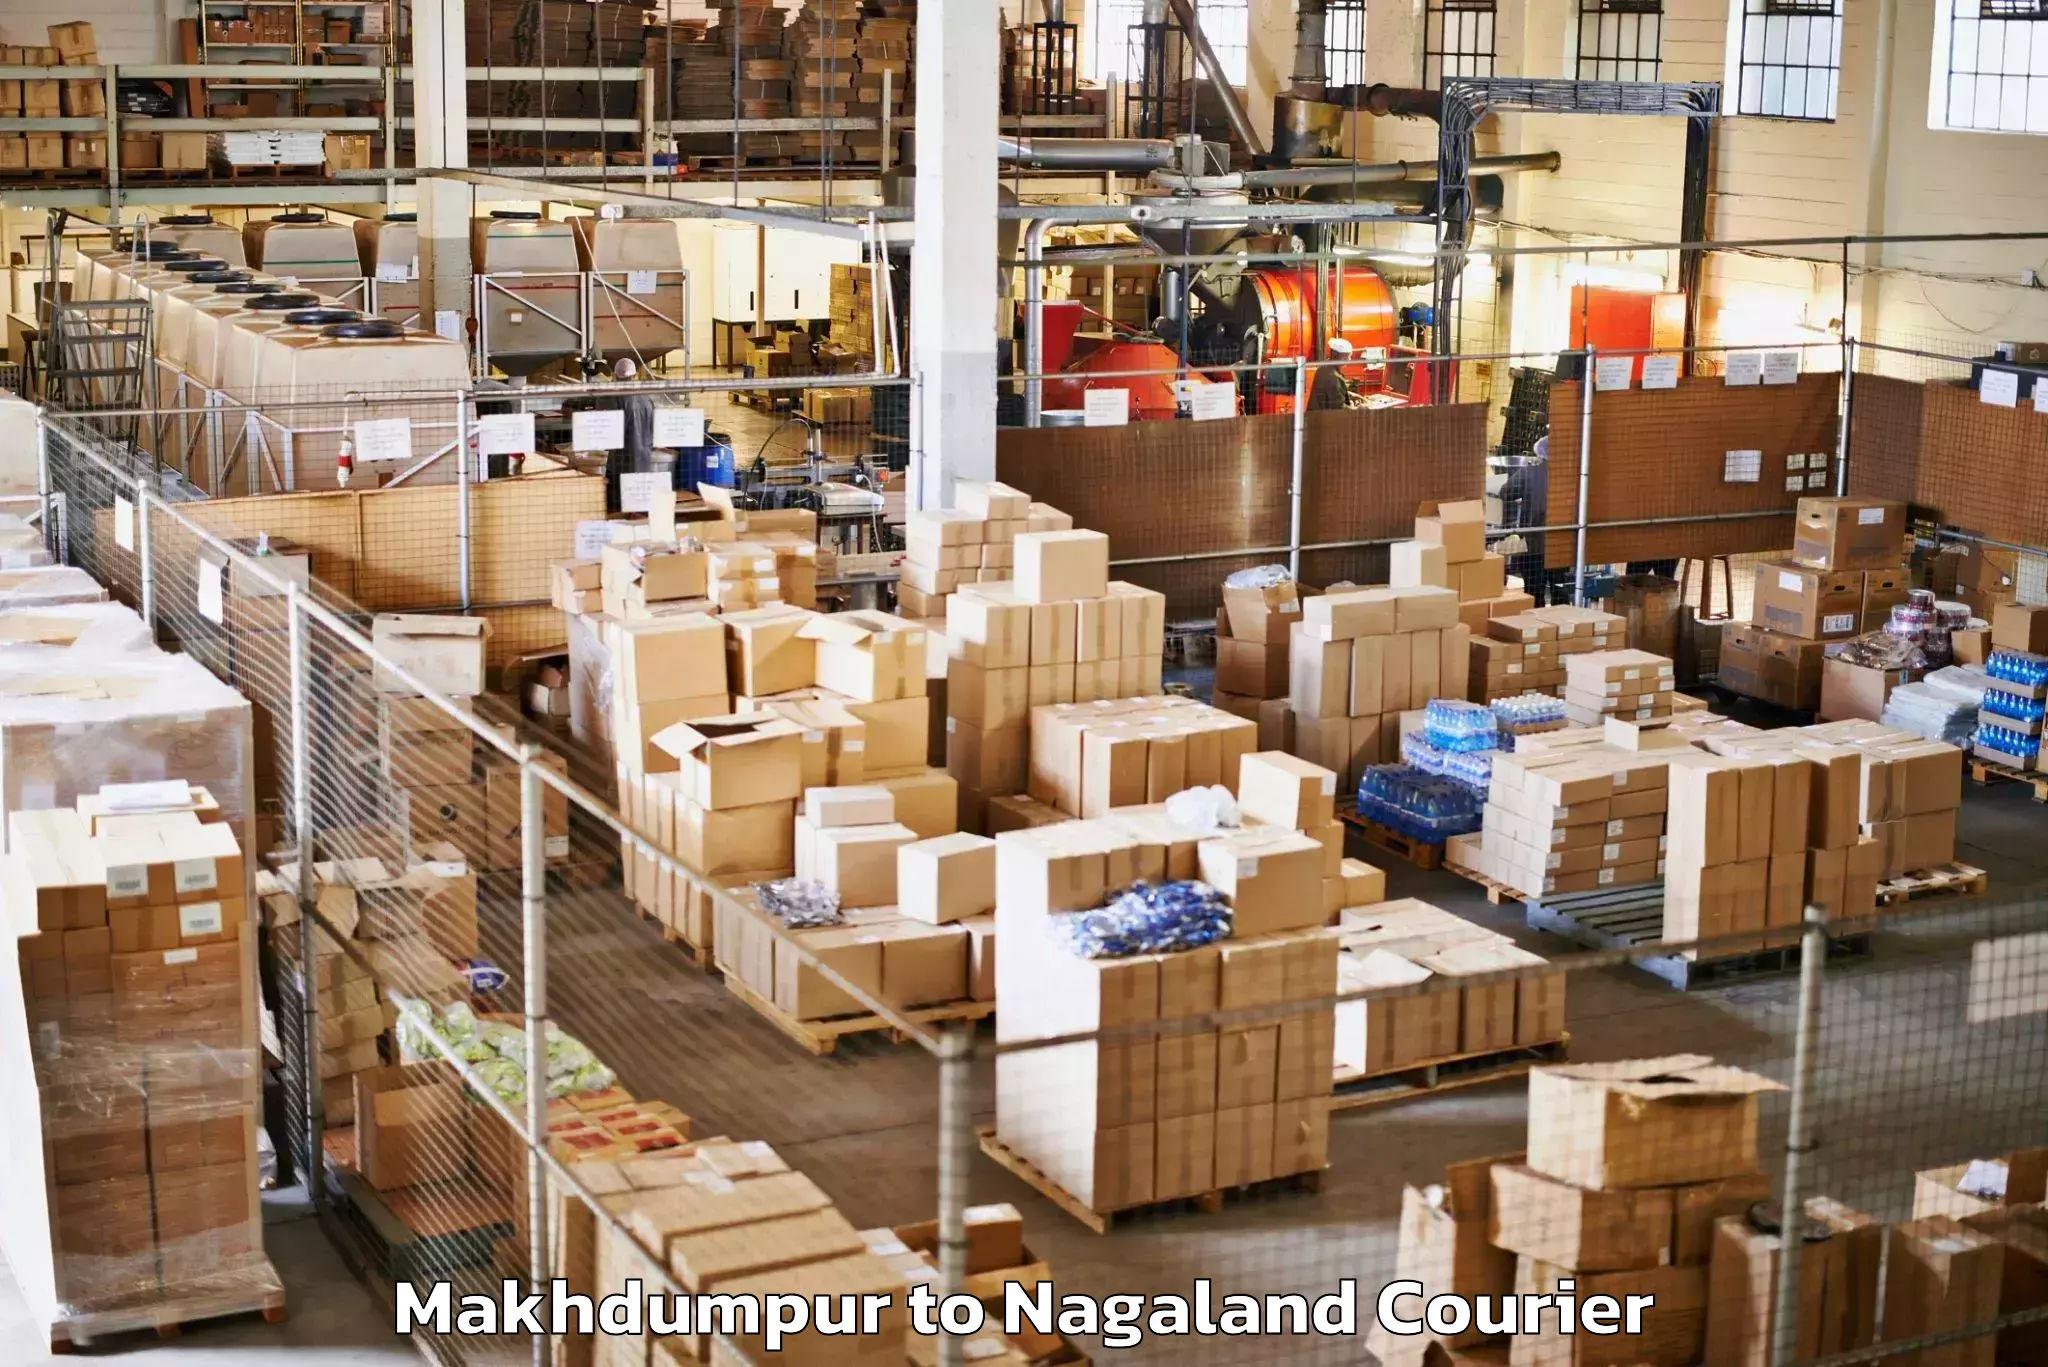 Baggage delivery management in Makhdumpur to Nagaland